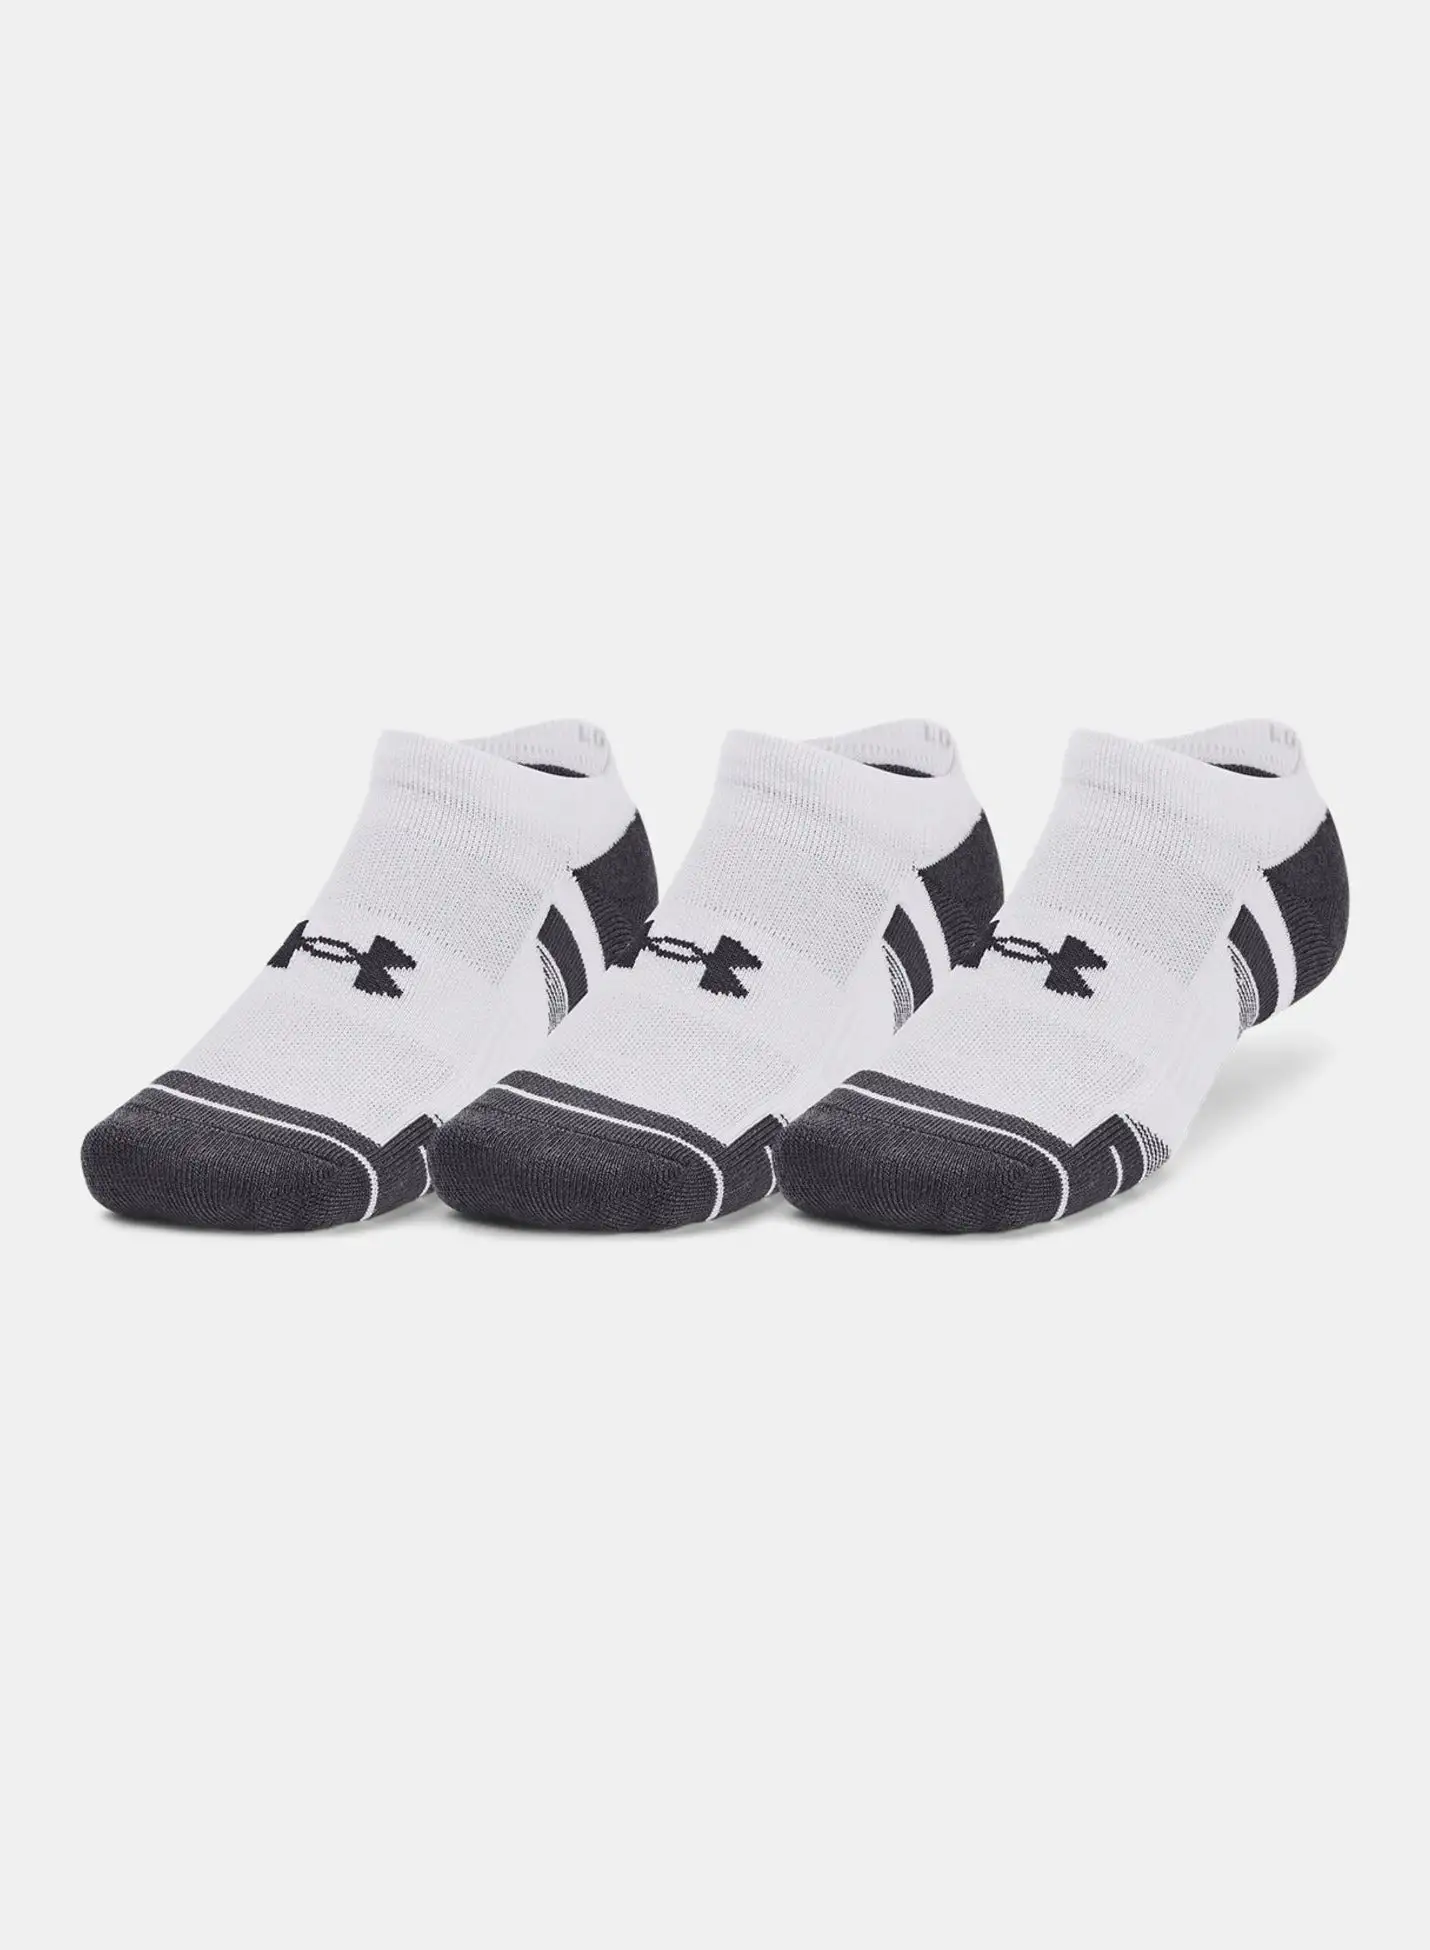 UNDER ARMOUR Performance Tech No Show Socks (Pack Of 3)